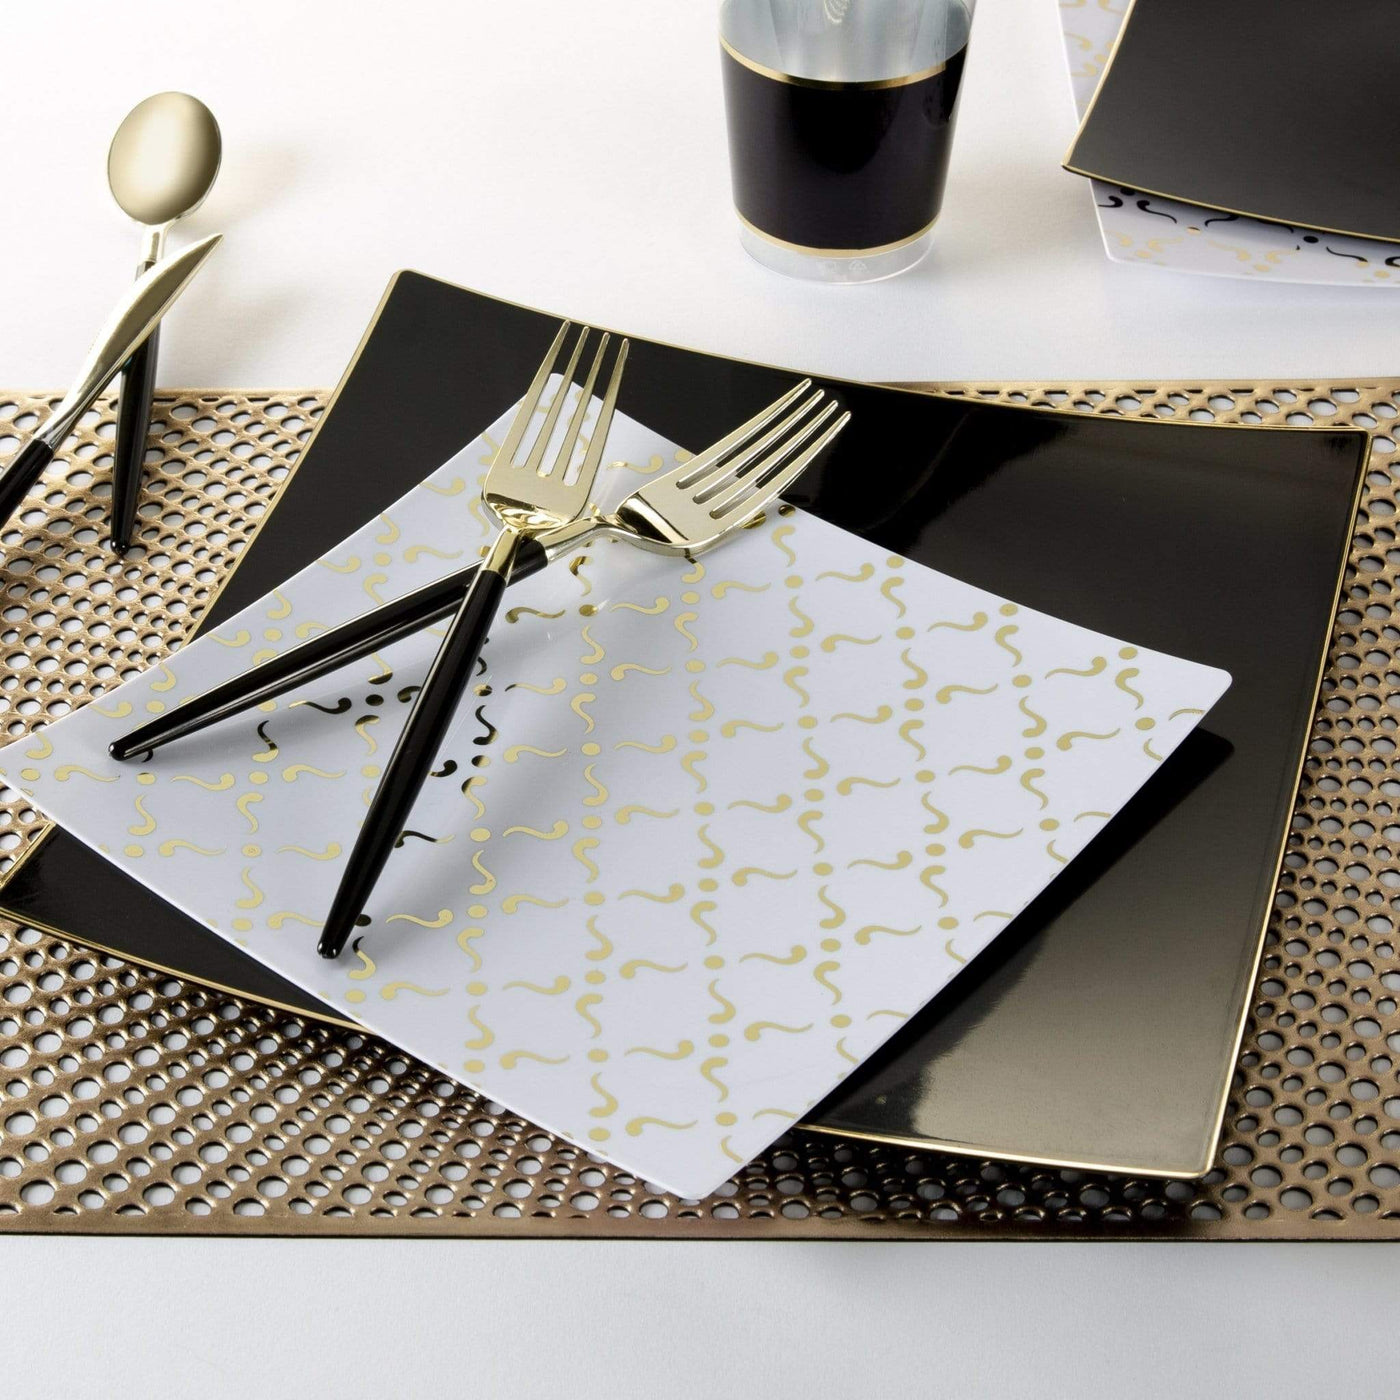 Square White • Gold Pattern Plastic Plates | 10 Plates - Set With Style